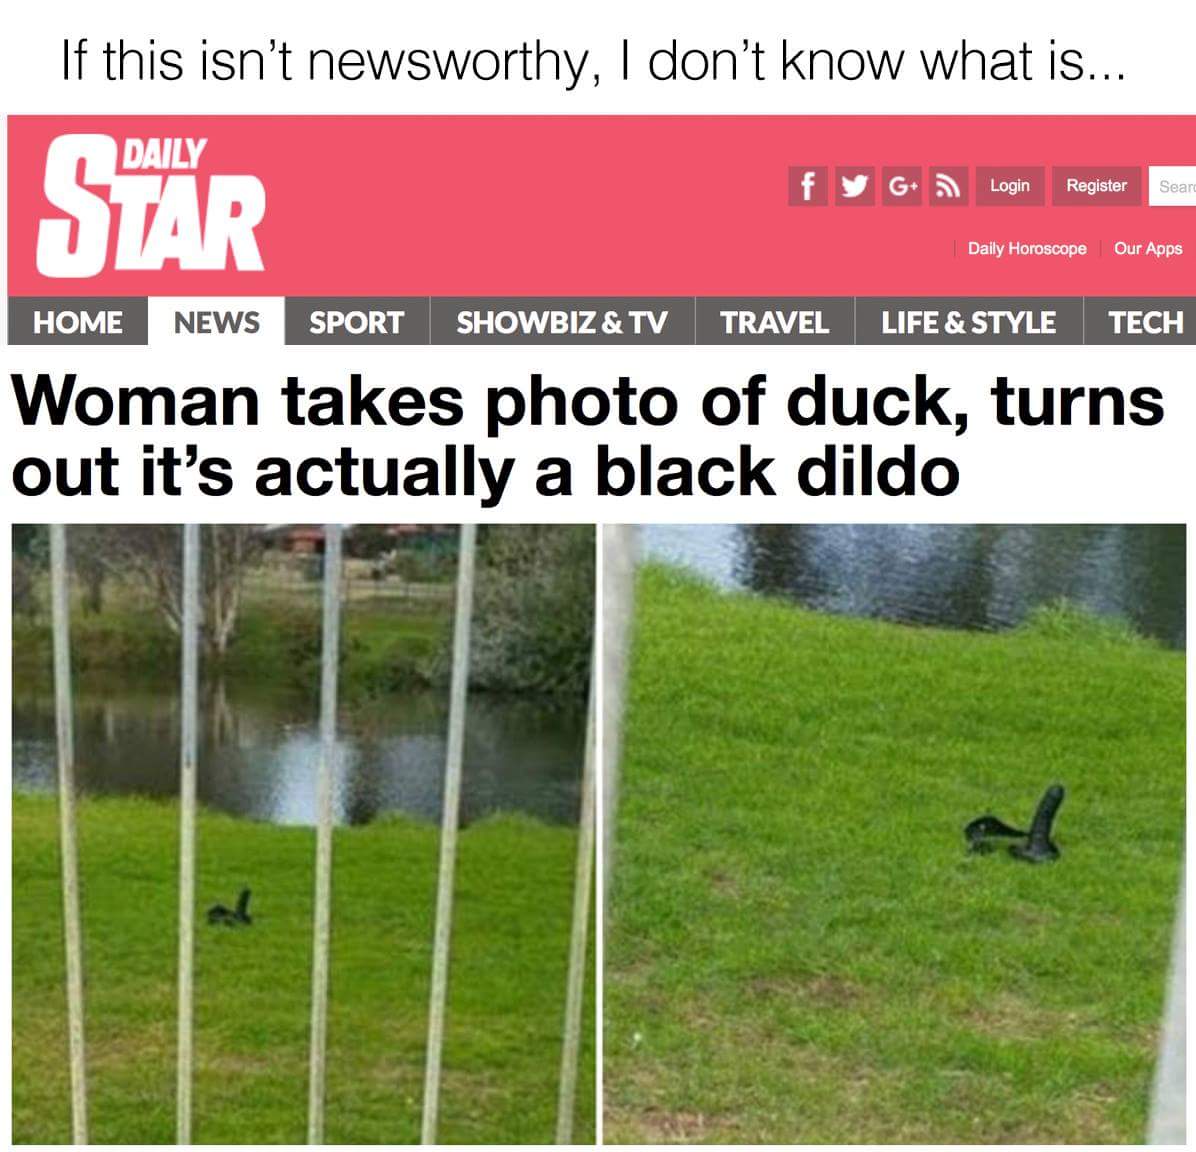 duck black dildo - If this isn't newsworthy, I don't know what is.... Daily f y Login Star G Register Login Sear Register Sean Daily Horoscope Our Apps Home News Sport Showbiz & Tv Travel Life & Style Tech Woman takes photo of duck, turns out it's actuall